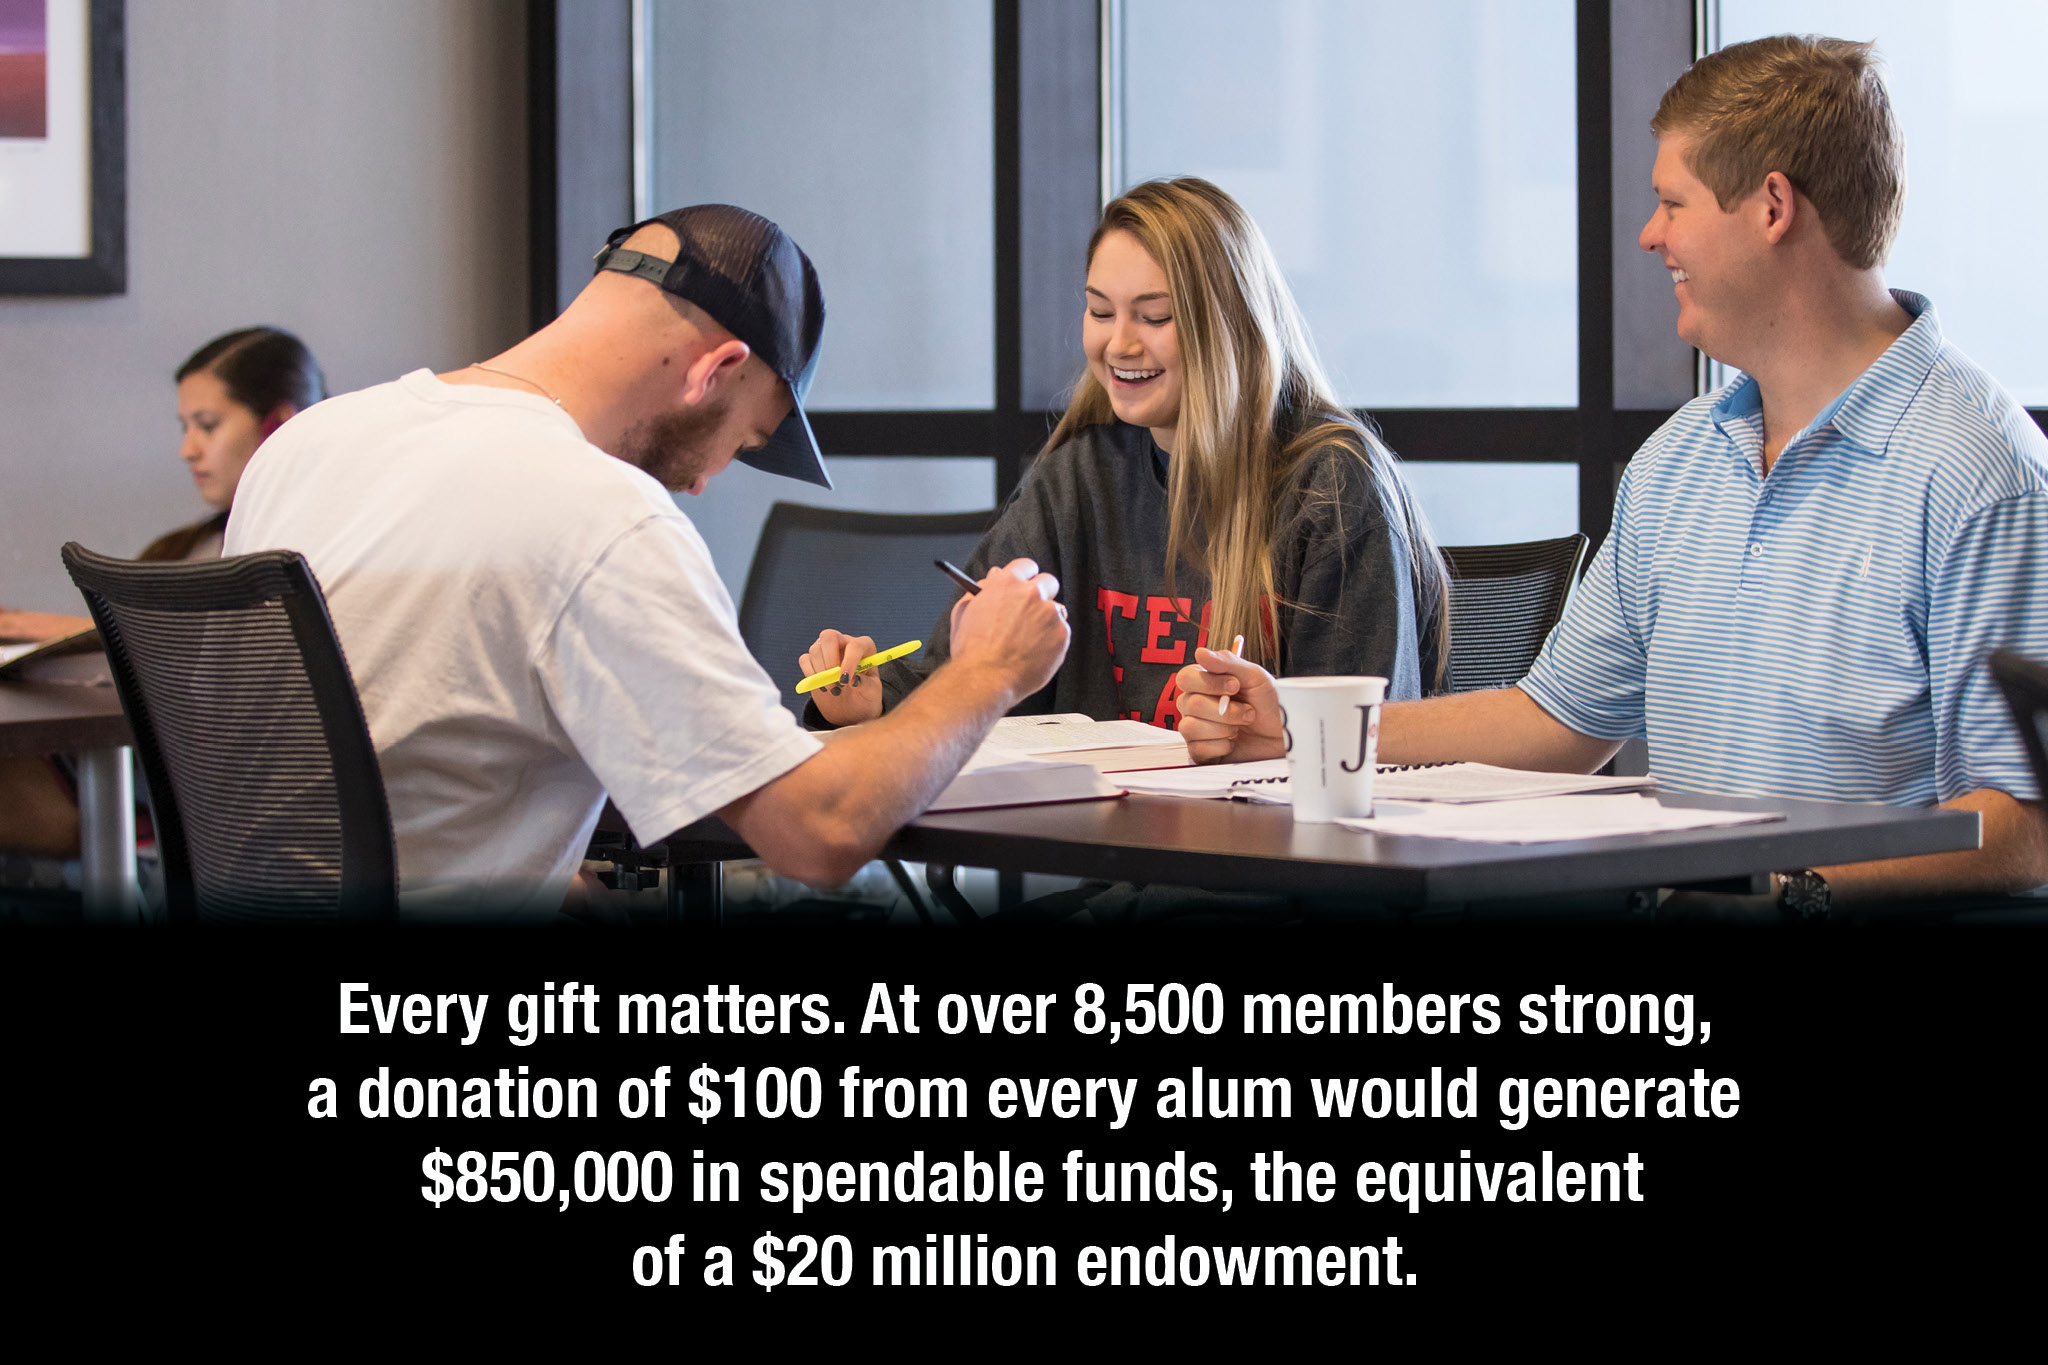 Every gift matters. At over 8,500 members strong, a donation of $100 from every alum would generate $850,000 in spendable funds, the equivalent of a $20 million endowment. 